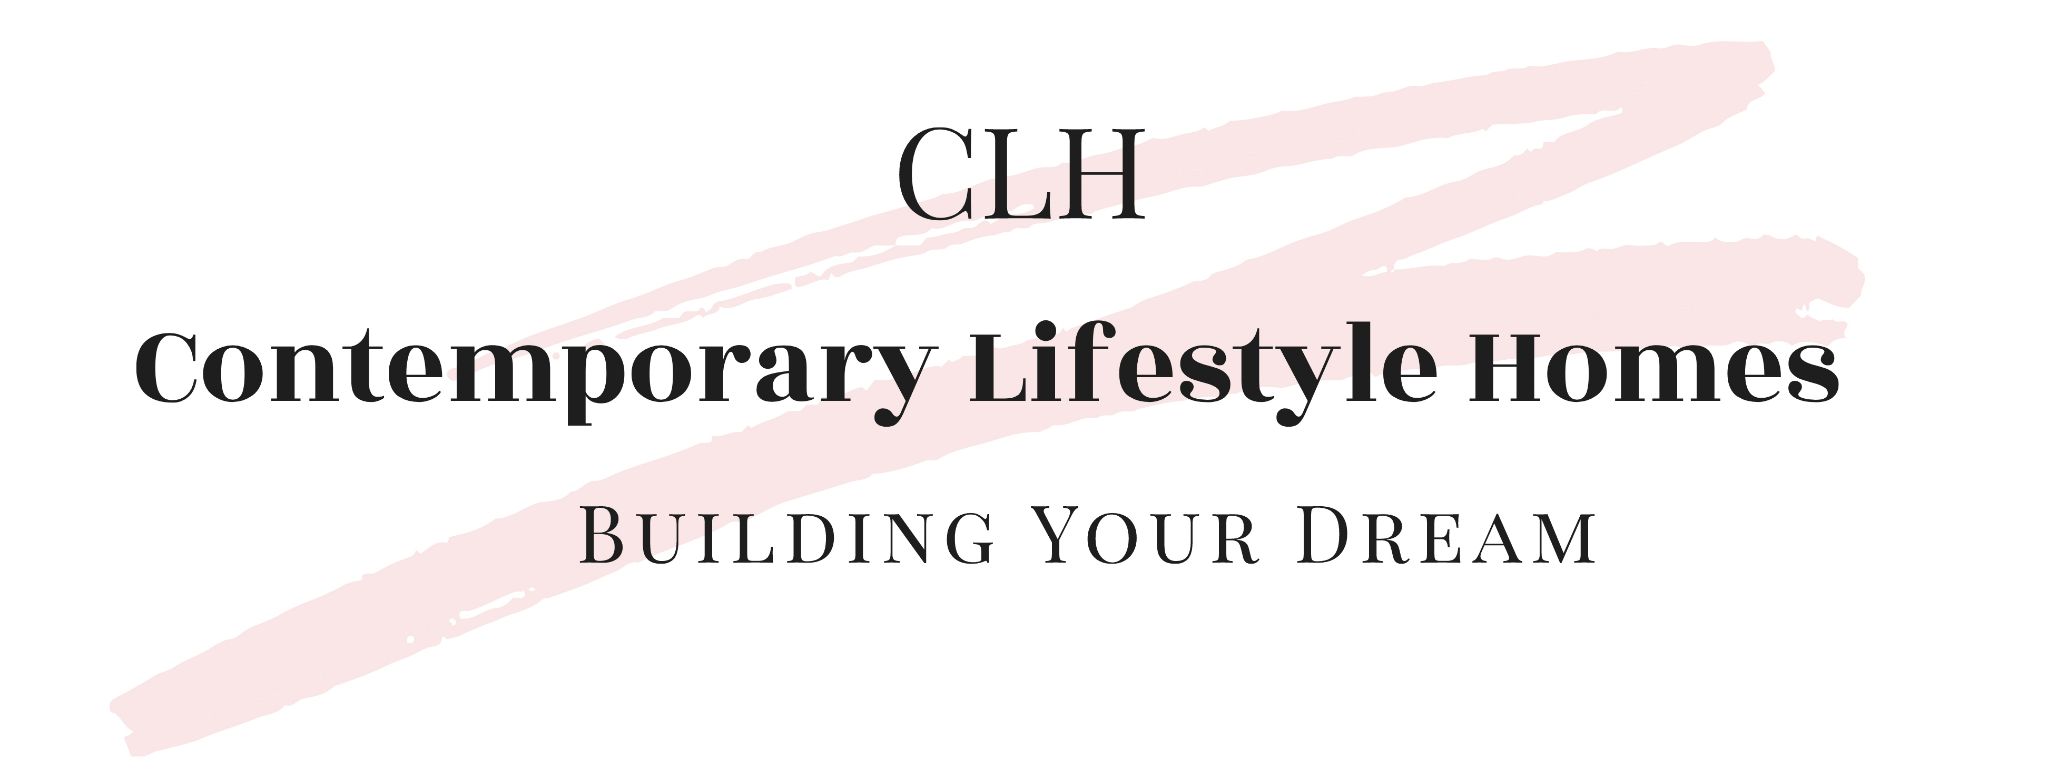 CLH
Contemporary Lifestyle Homes
Building your dream